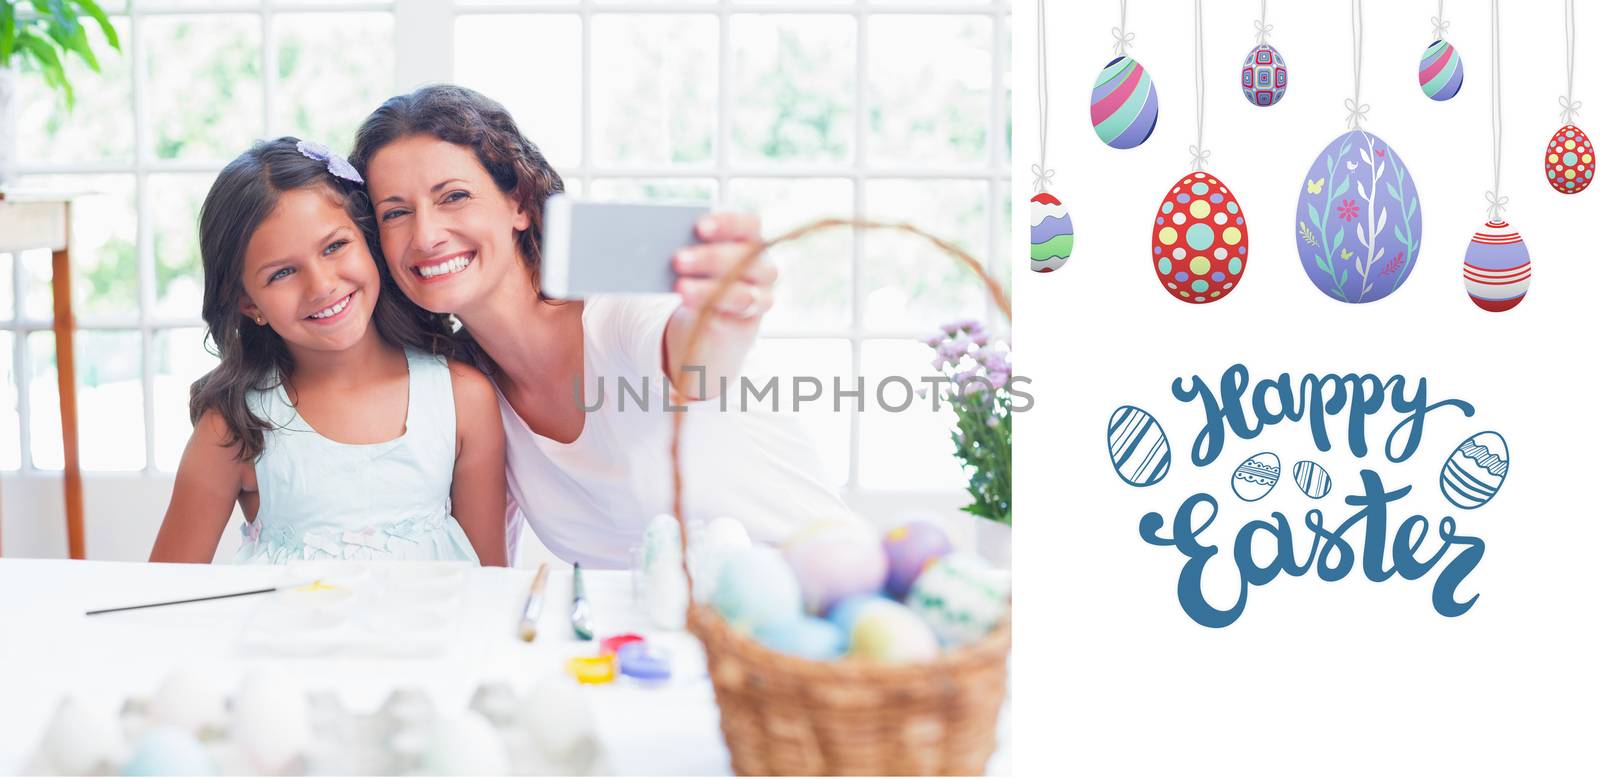 Happy mother and daughter taking selfie against happy easter graphic